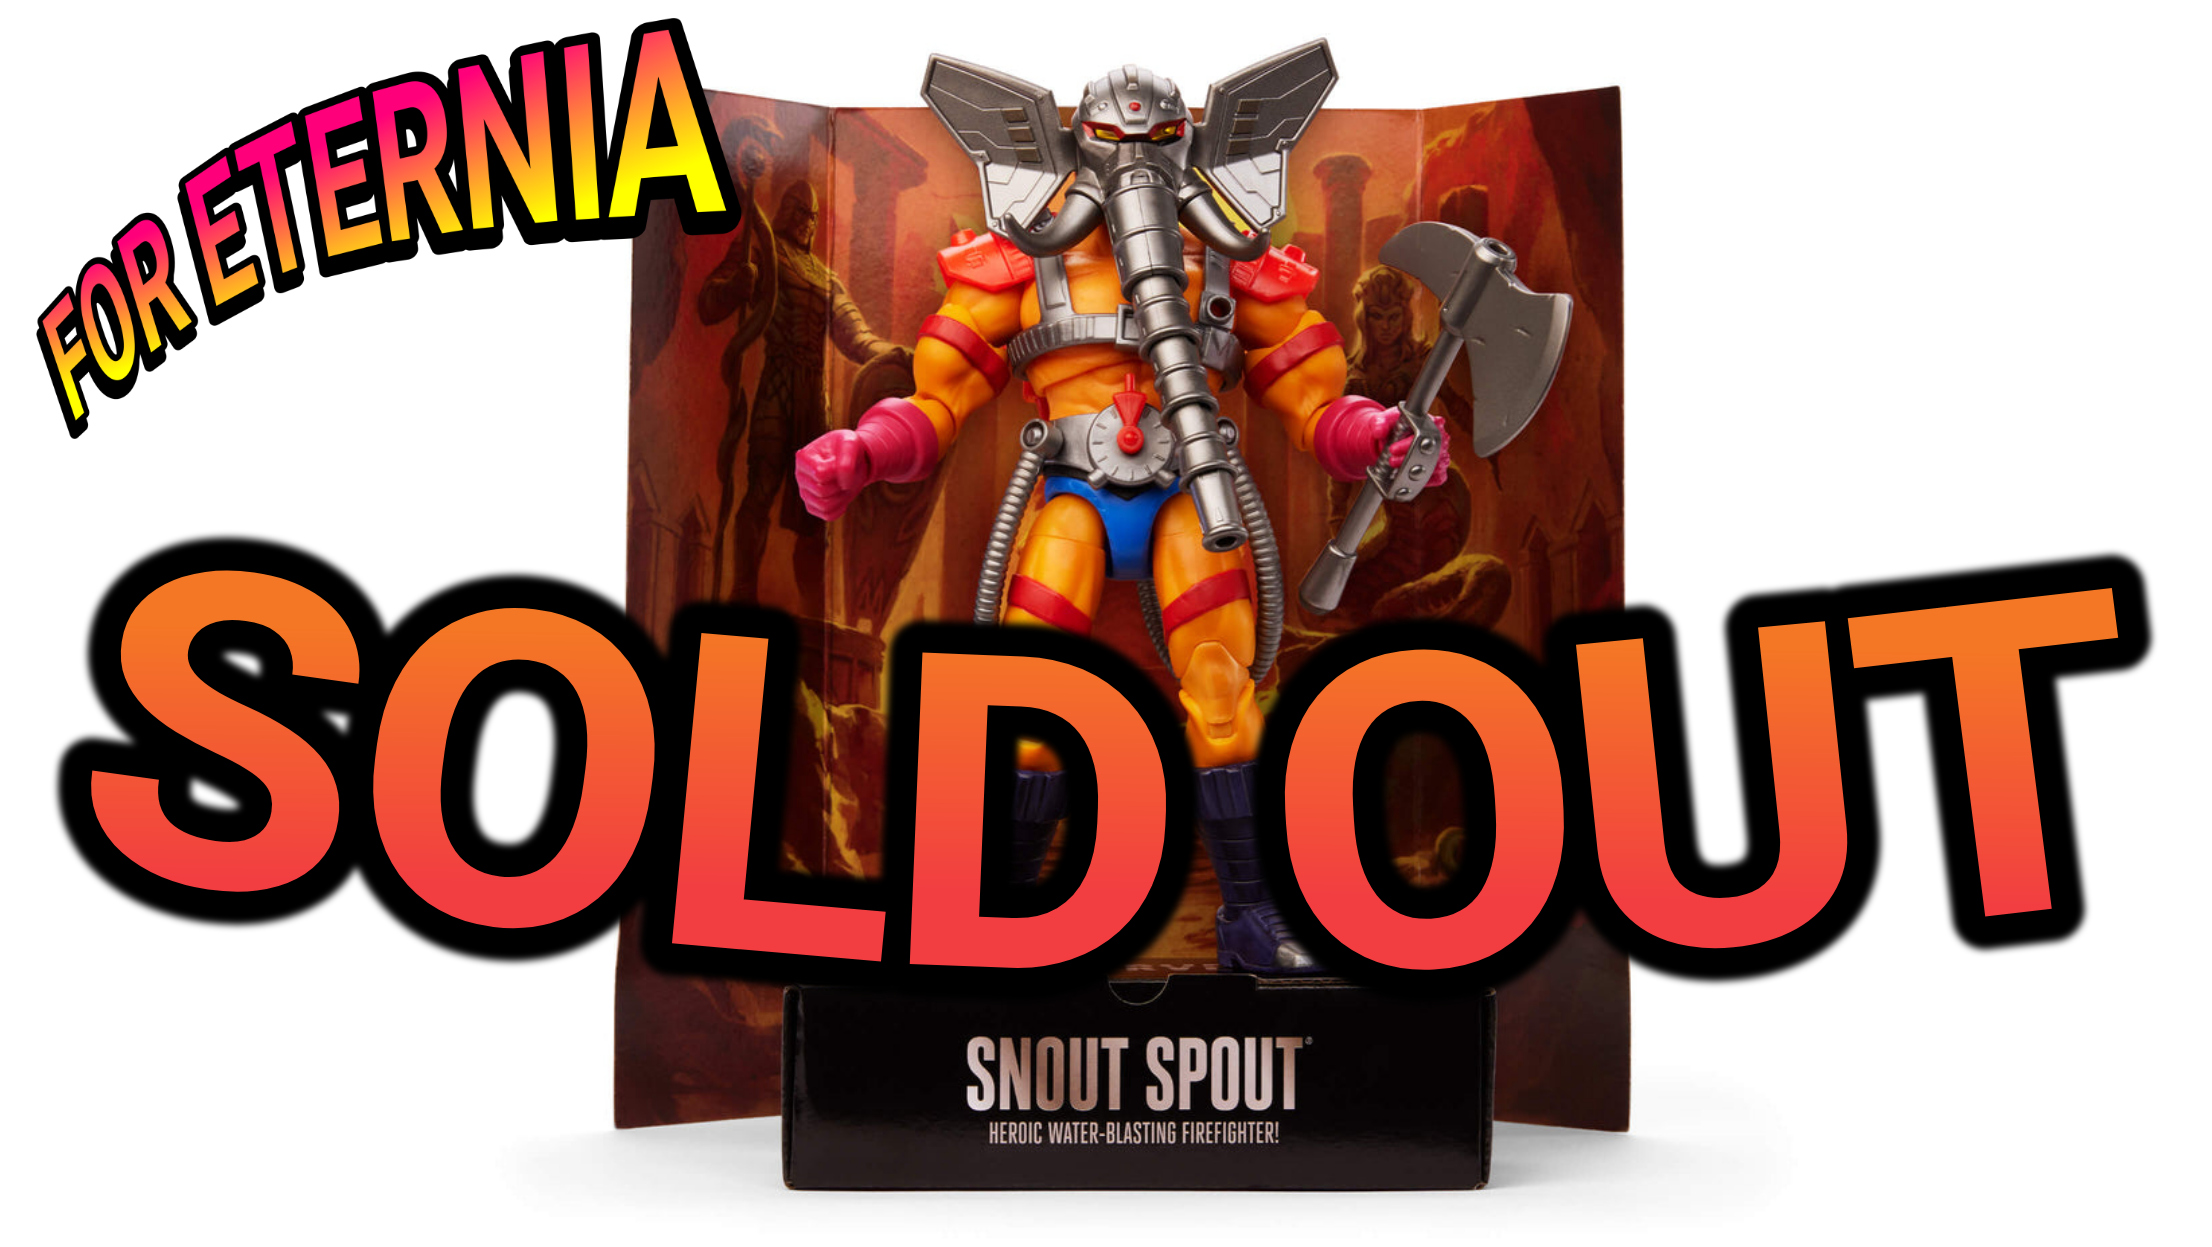 SOLD OUT! Snout Spout becomes the first Masterverse Mattel Creations Exclusive figure to sell out